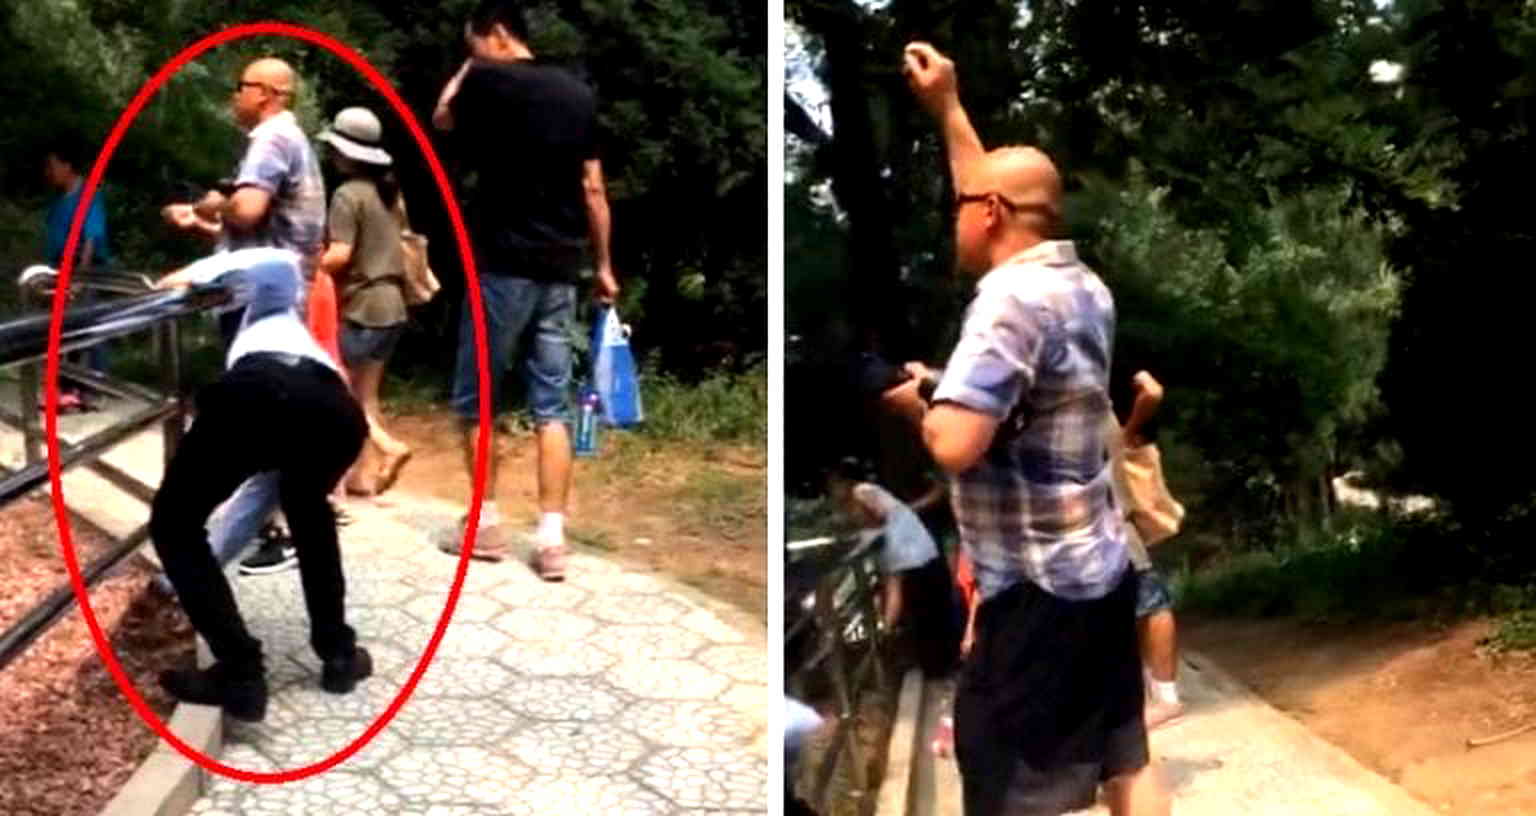 Zoo Visitors in Beijing Caught on Video Throwing Rocks at a Tiger to ‘Make It Move’